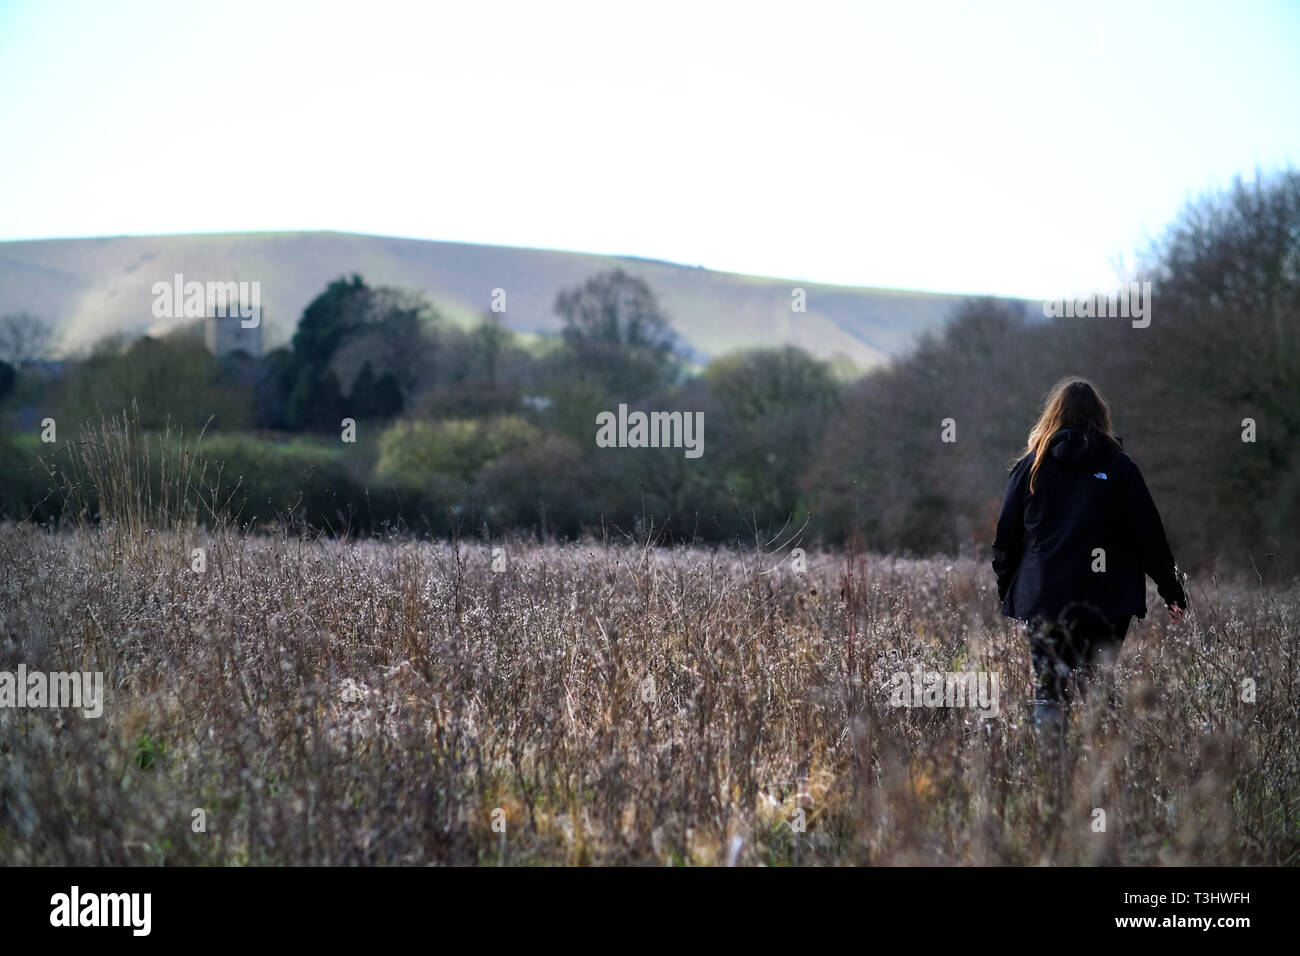 Woman walking in a field of weeds Stock Photo